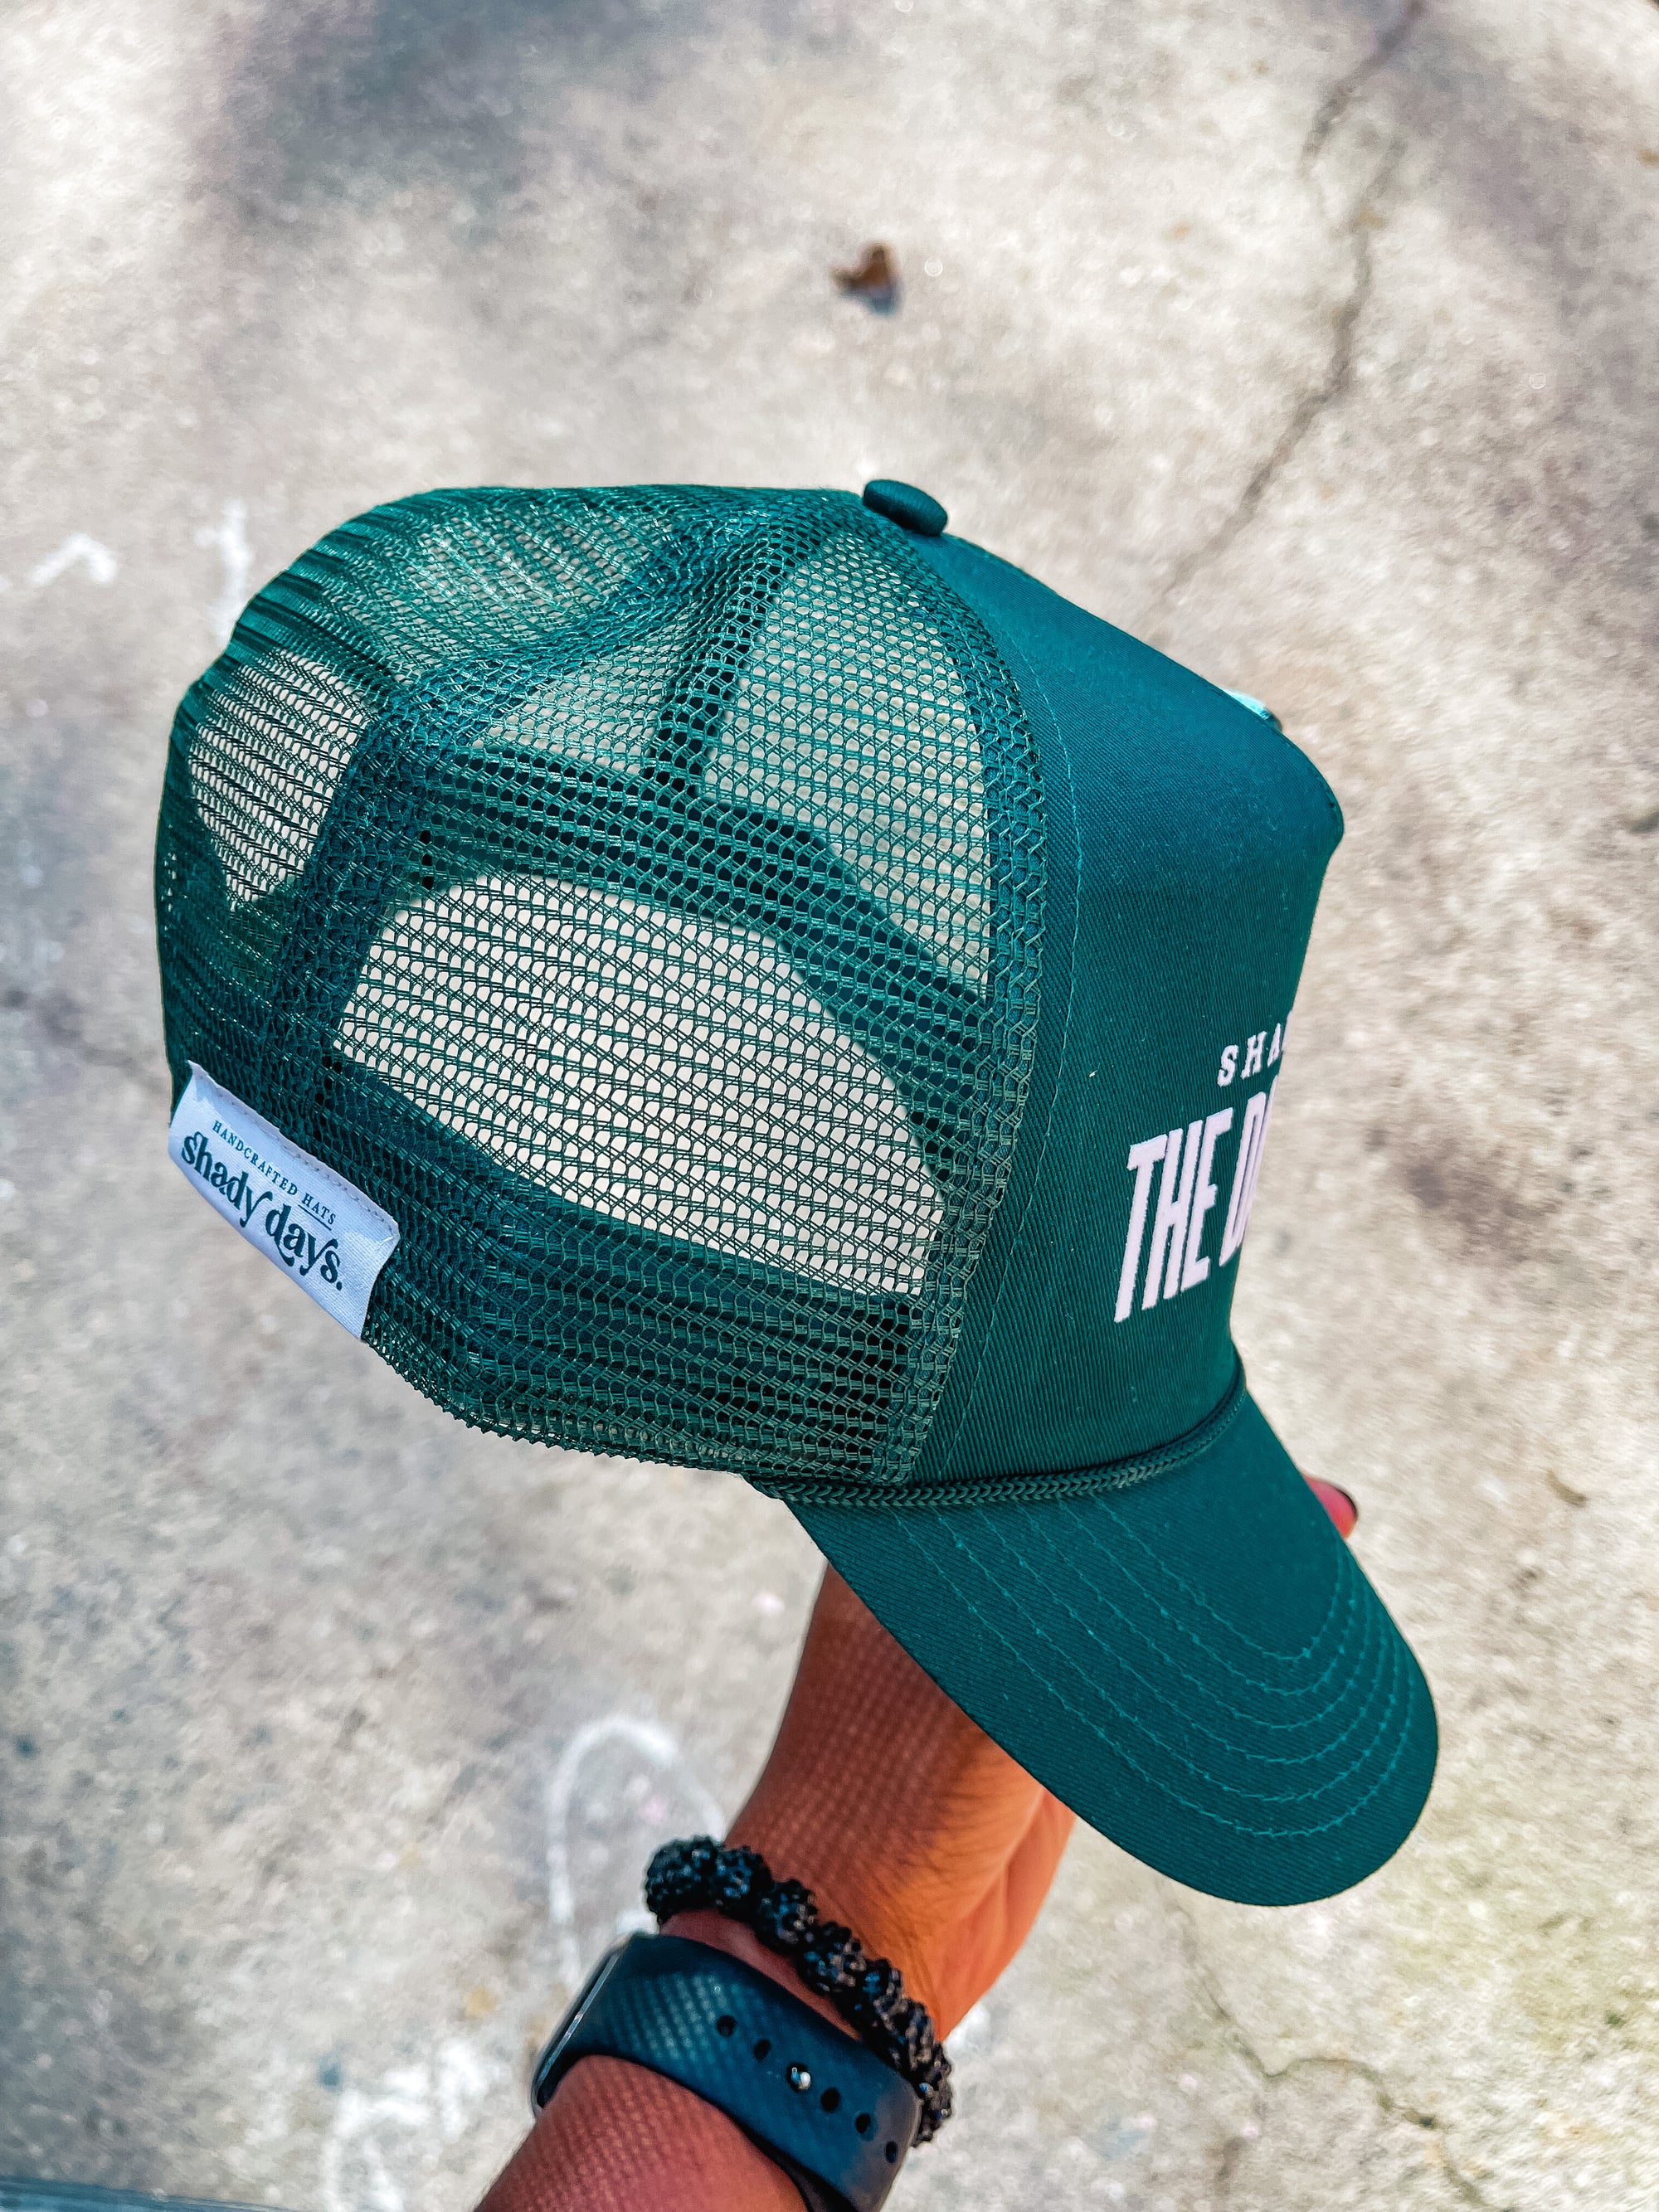 The Daily Brim (Green)